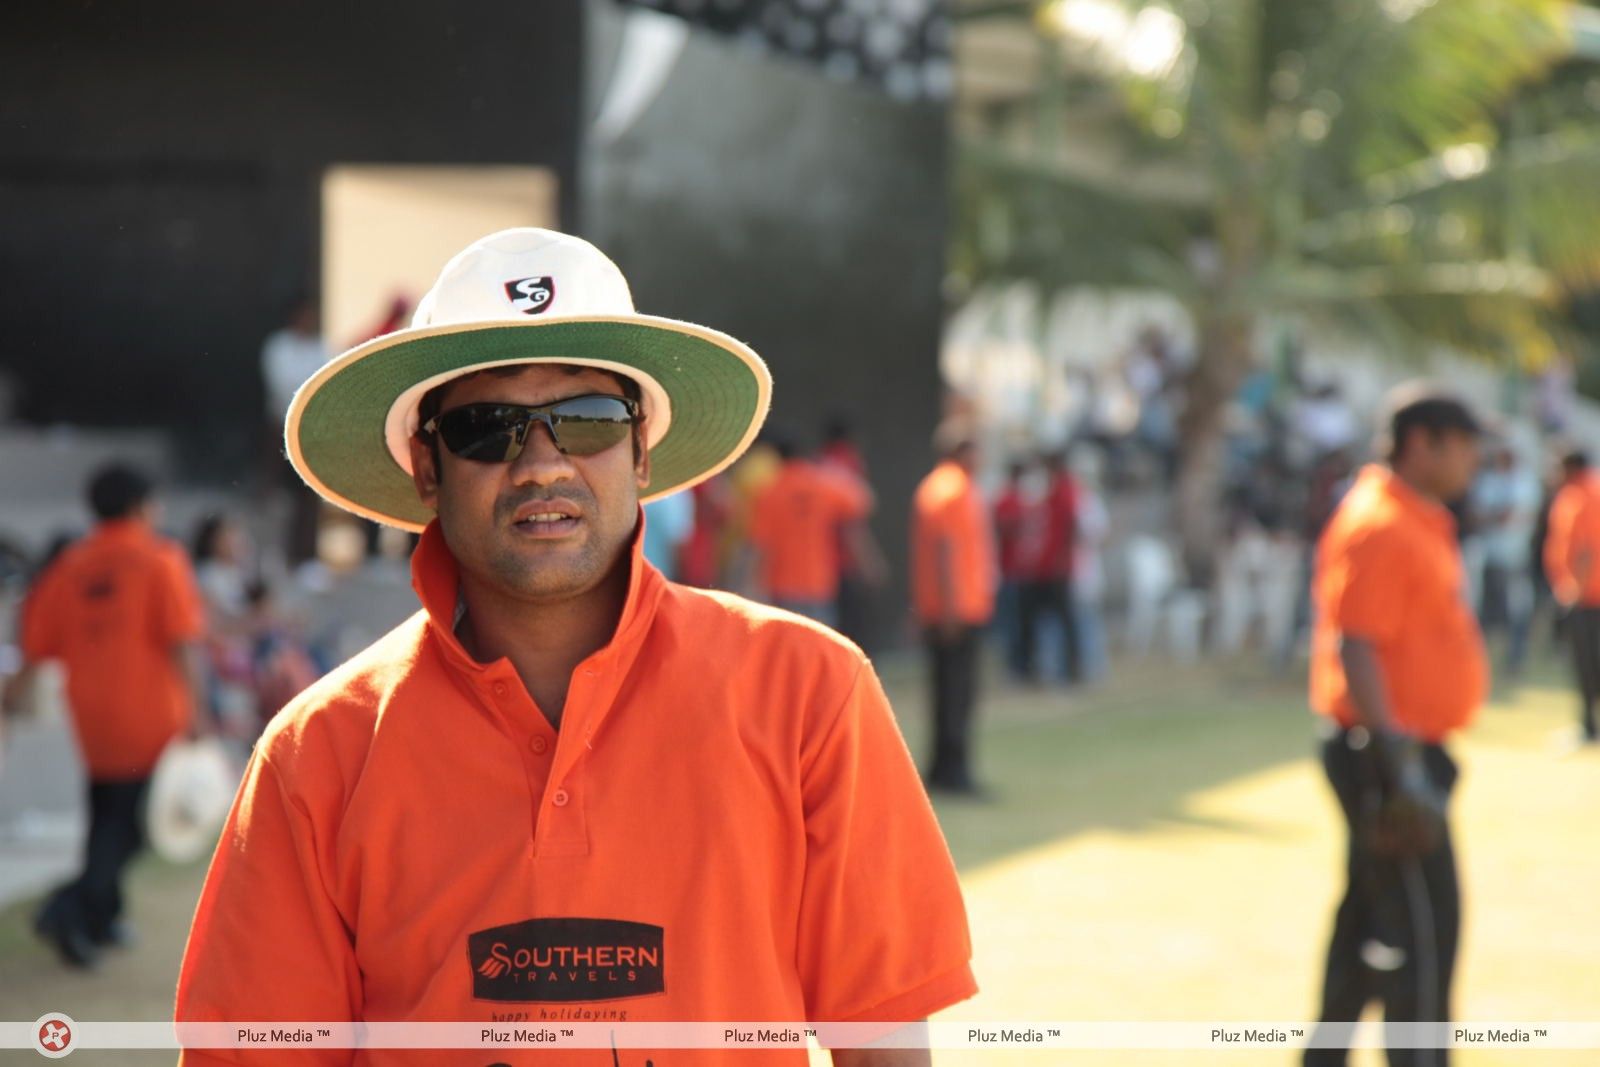 Super Starlet Cup Star Cricket Match - Pictures | Picture 129240